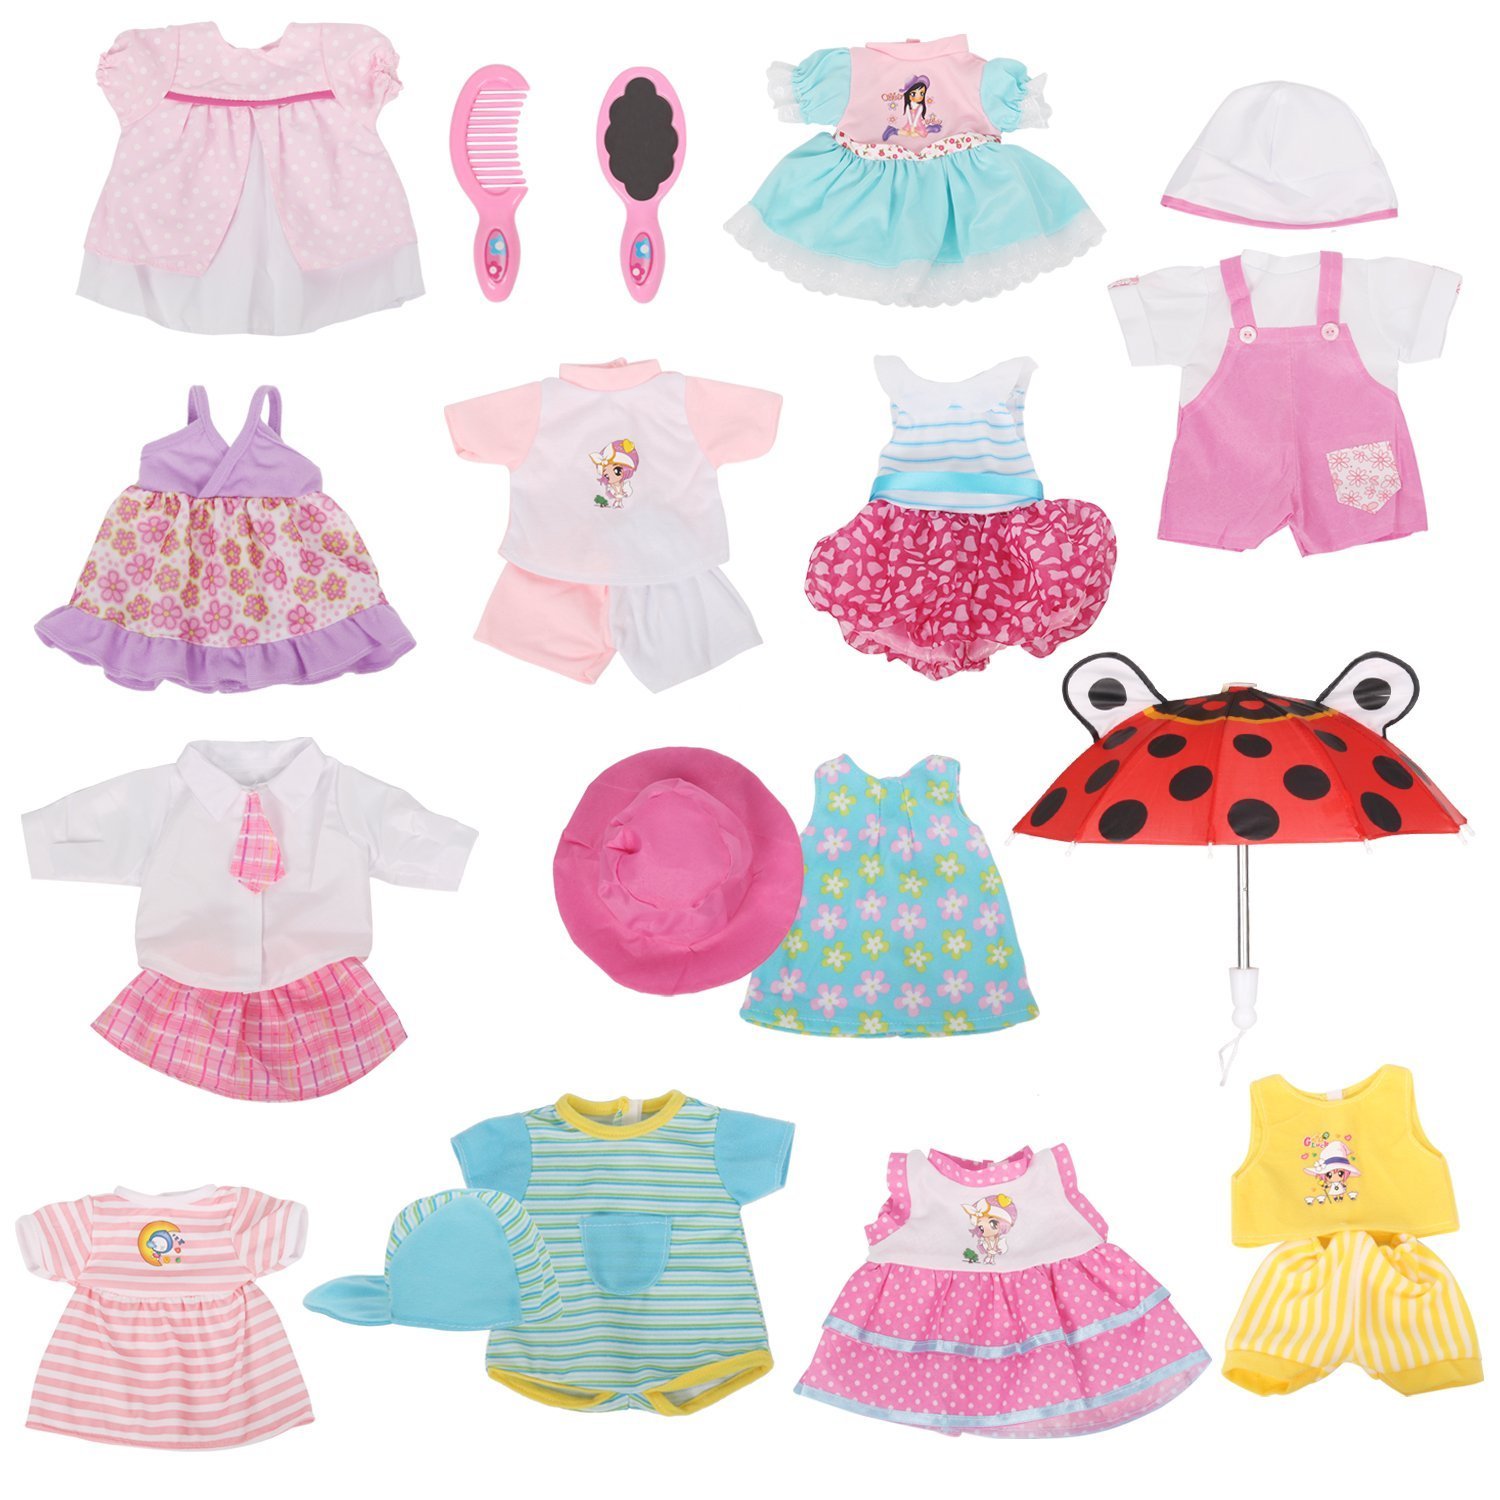 Set of 12 Handmade Lovely Baby Doll Clothes Dress Outfits Costumes For ...